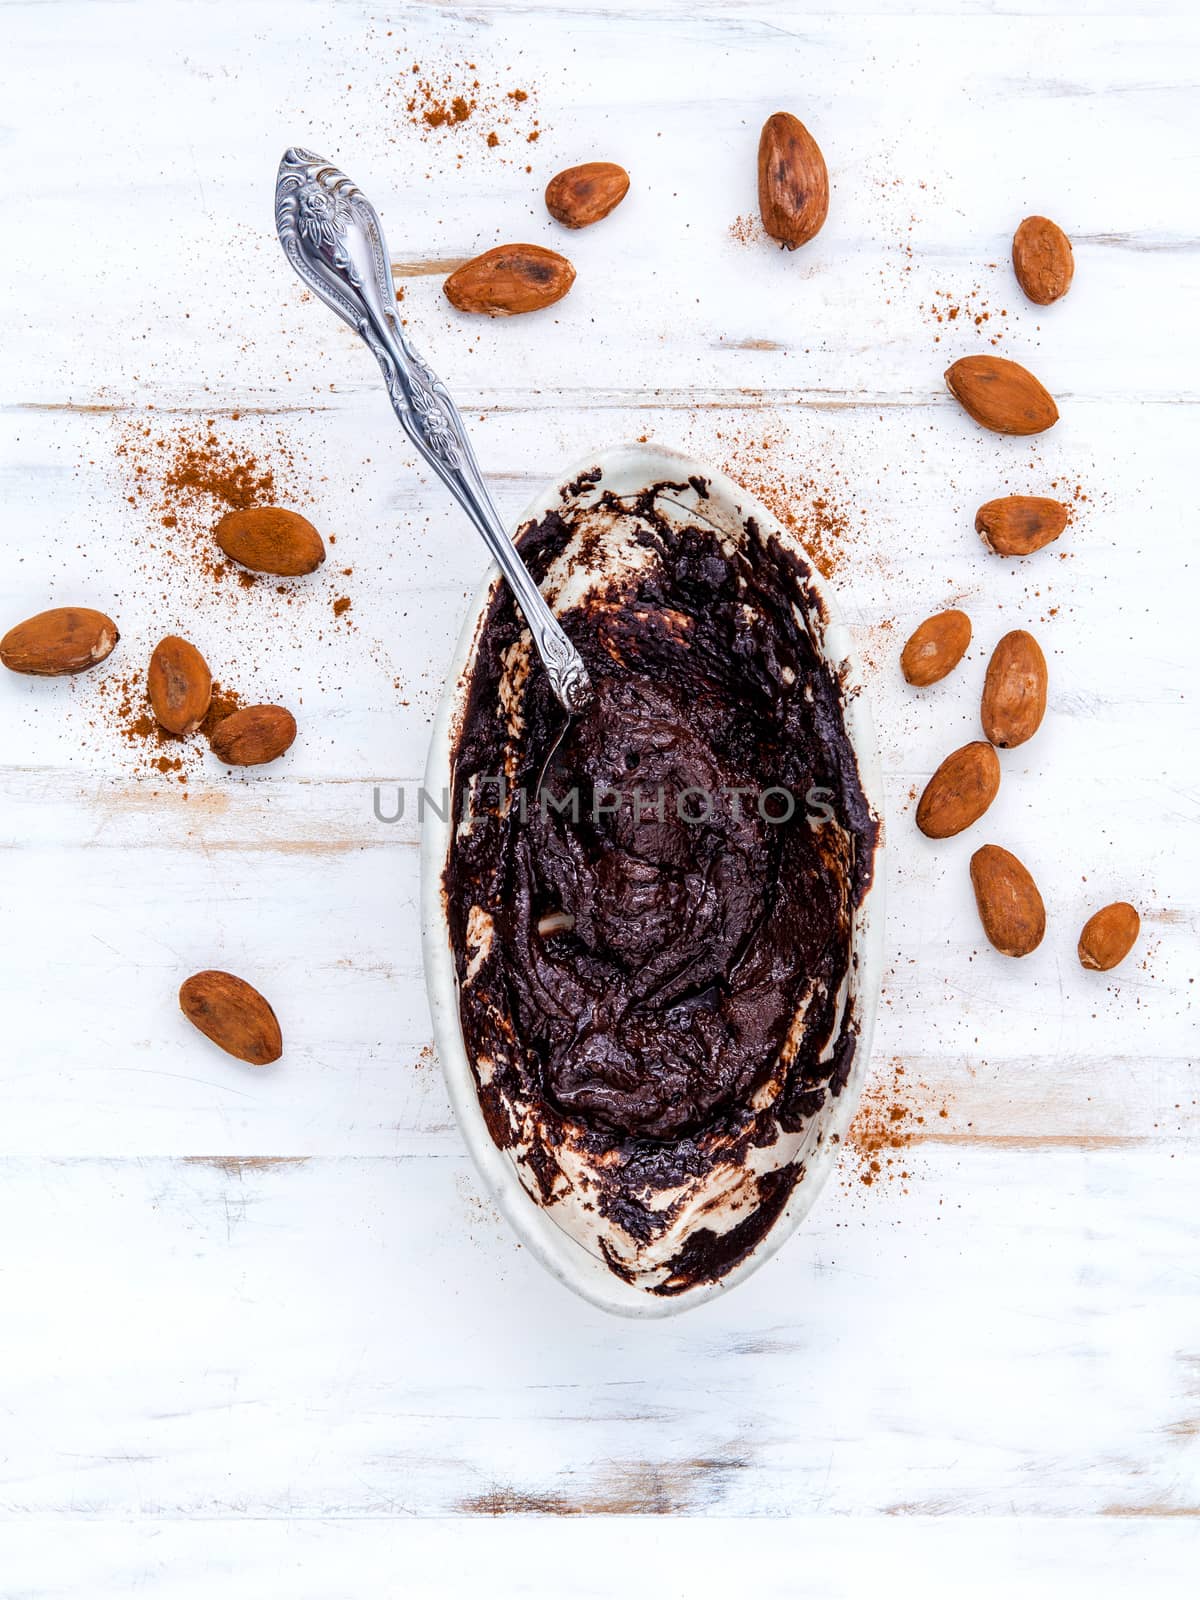 Melted chocolate with metal spoon in ceramic bowl and roast coco by kerdkanno